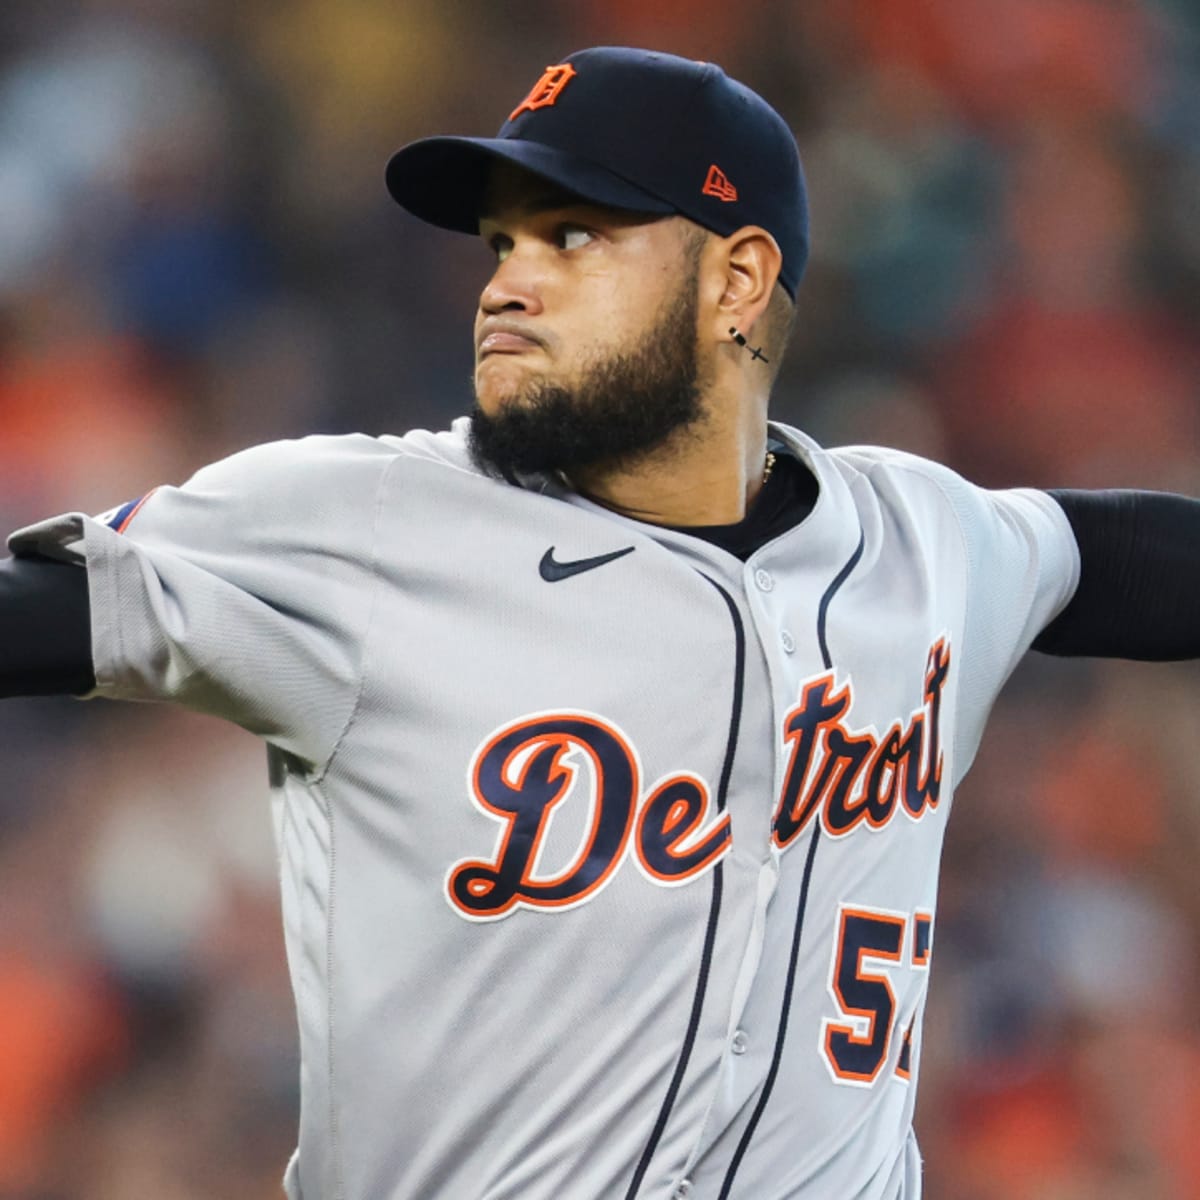 Tigers GM: E-Rod not communicating with team after going on restricted list